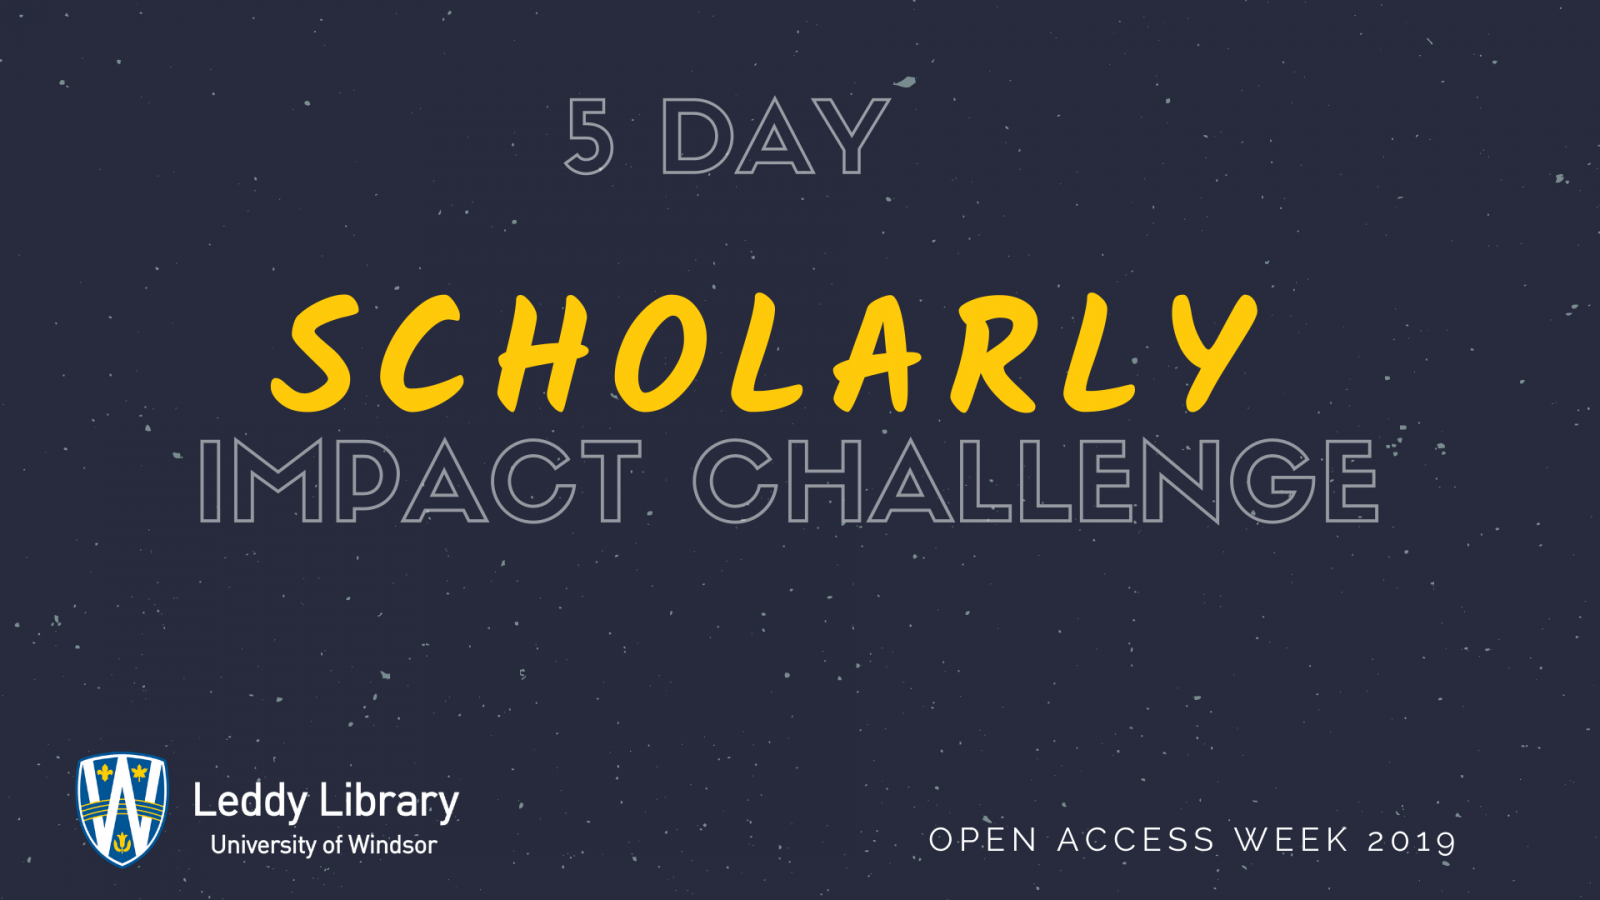 5 Day Scholarly Impact Challenge